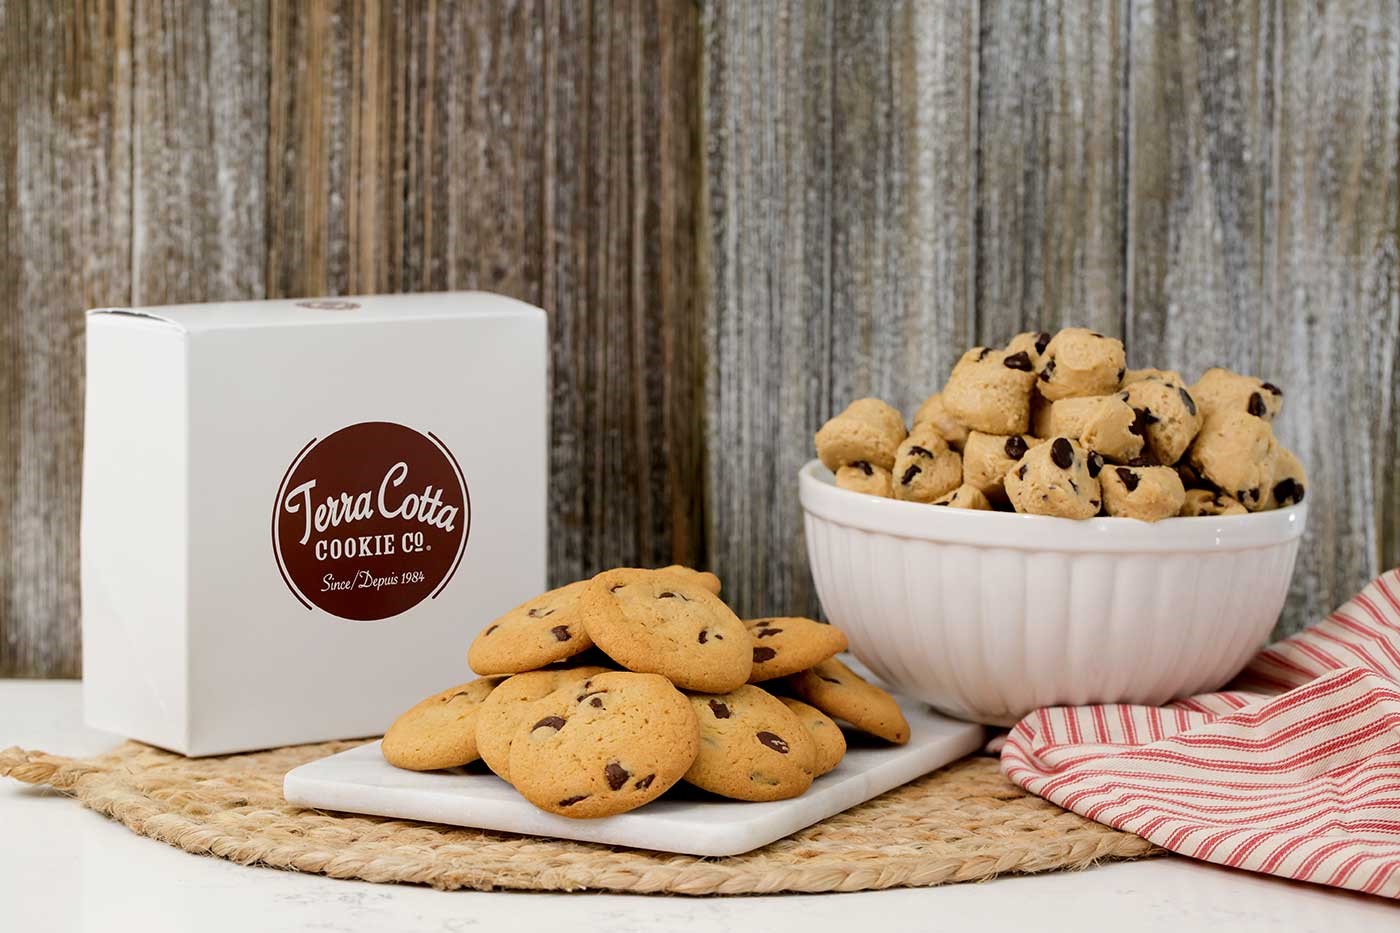 Cookies are present on a plate with a box nearby labelled 'Terra Cotta Cookie Co.'